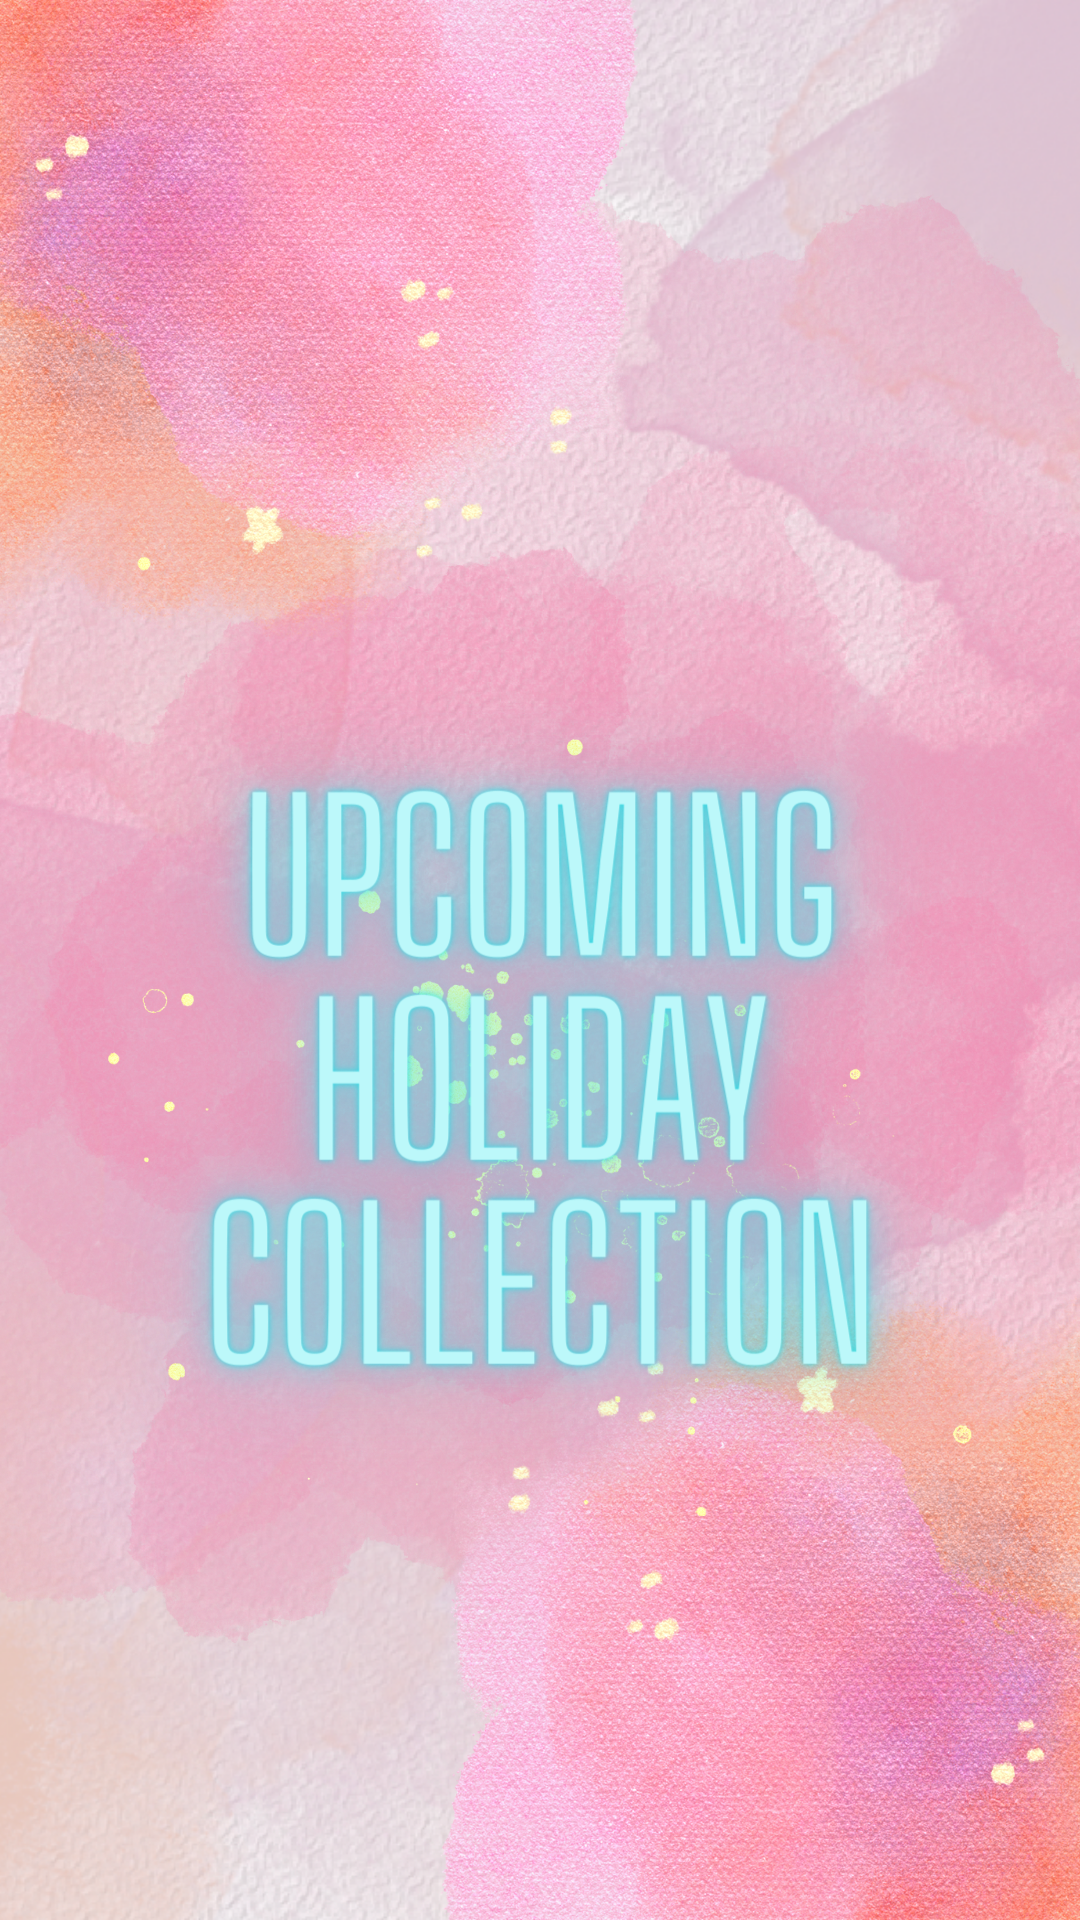 Upcoming Holiday Collection